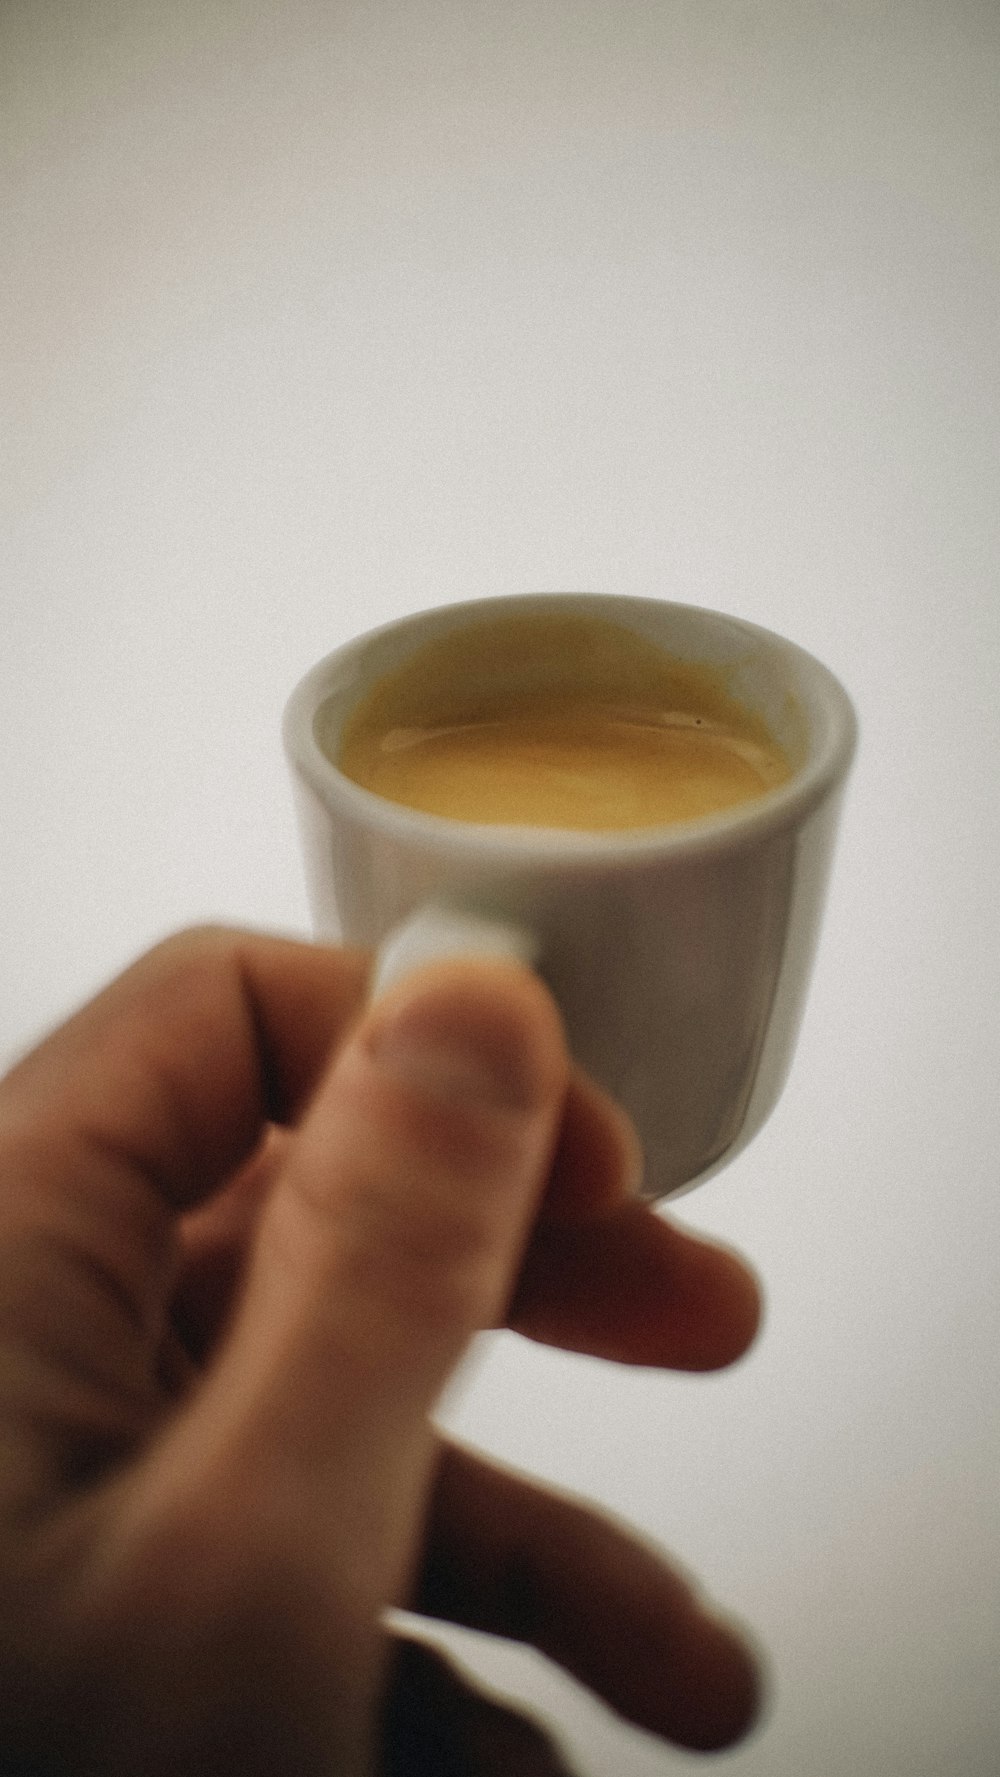 a person holding a cup of coffee in their hand